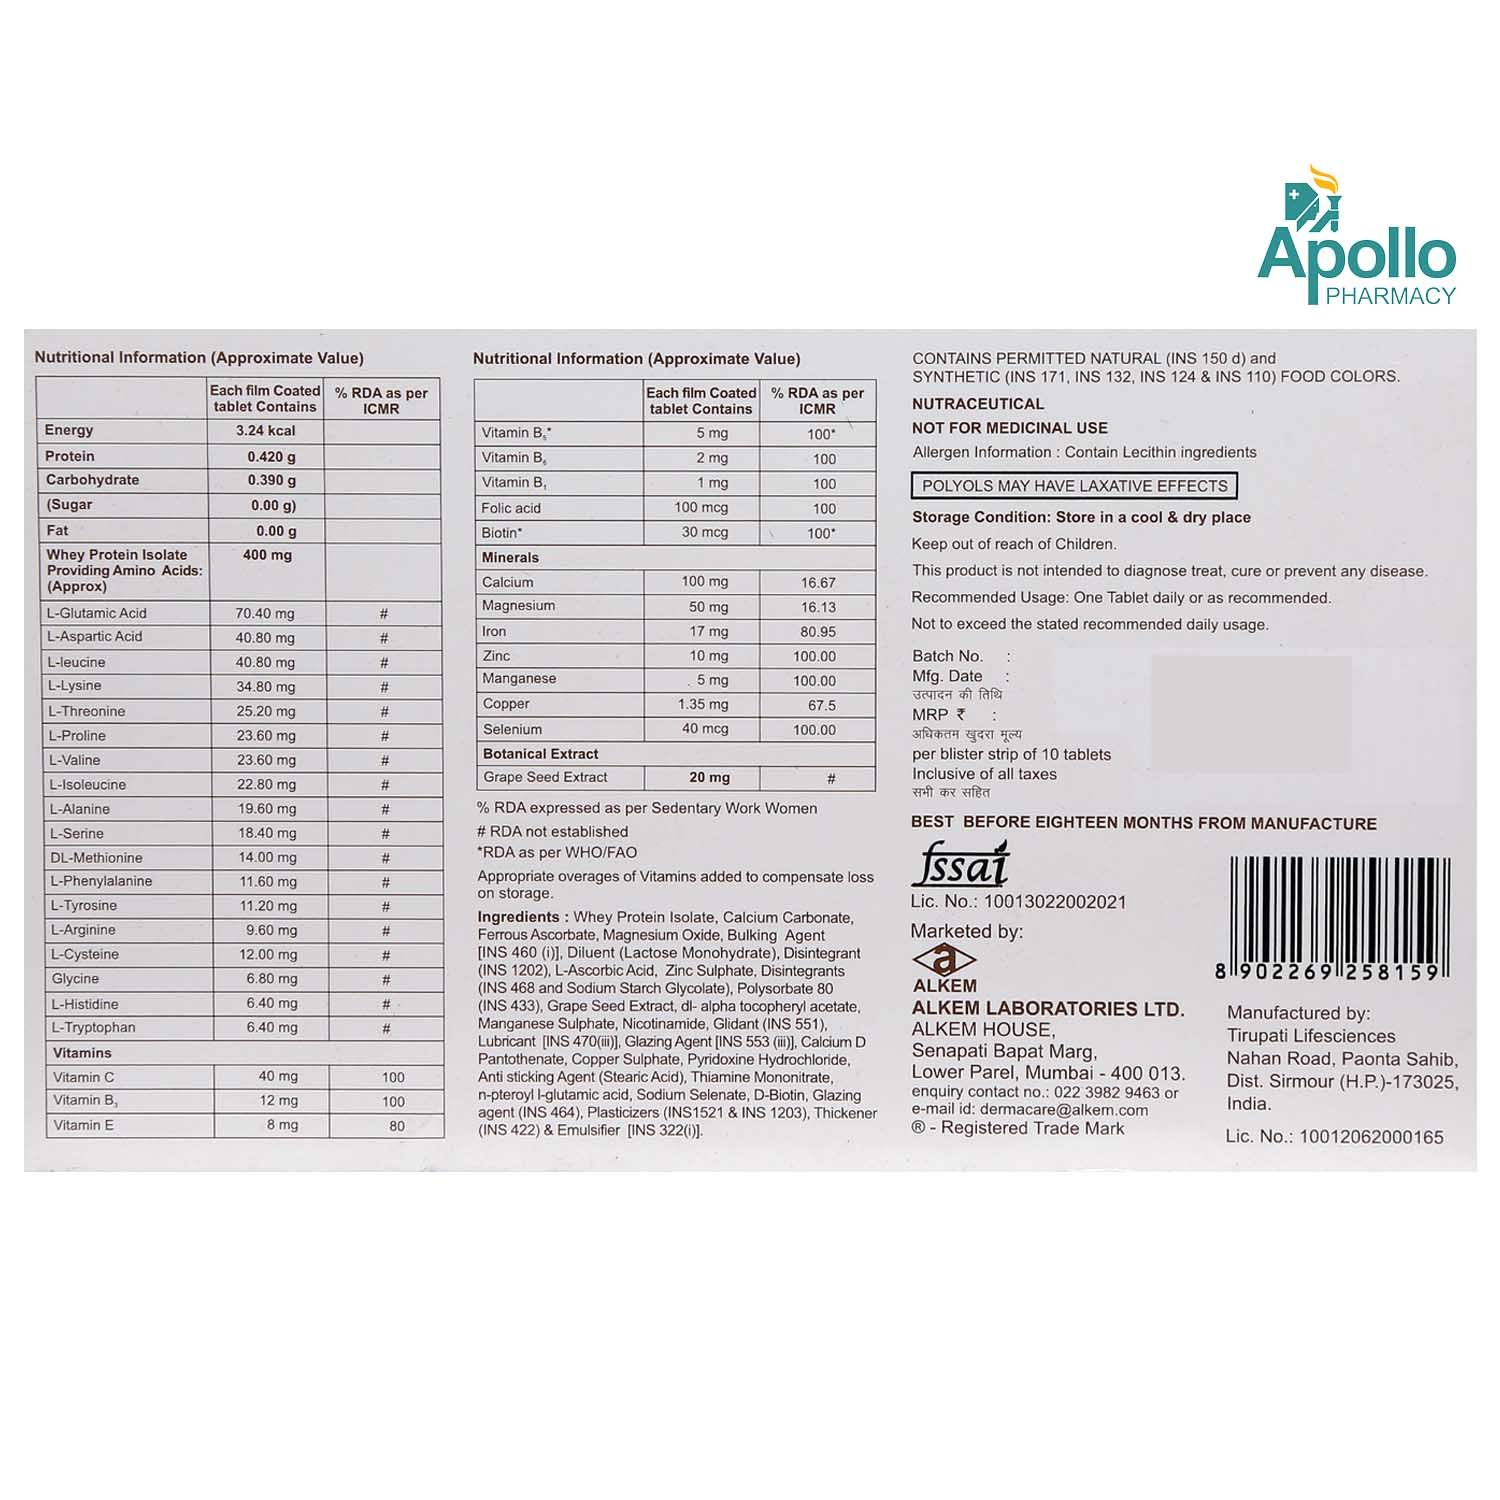 Renocia Tablet 10's Price, Uses, Side Effects, Composition - Apollo Pharmacy